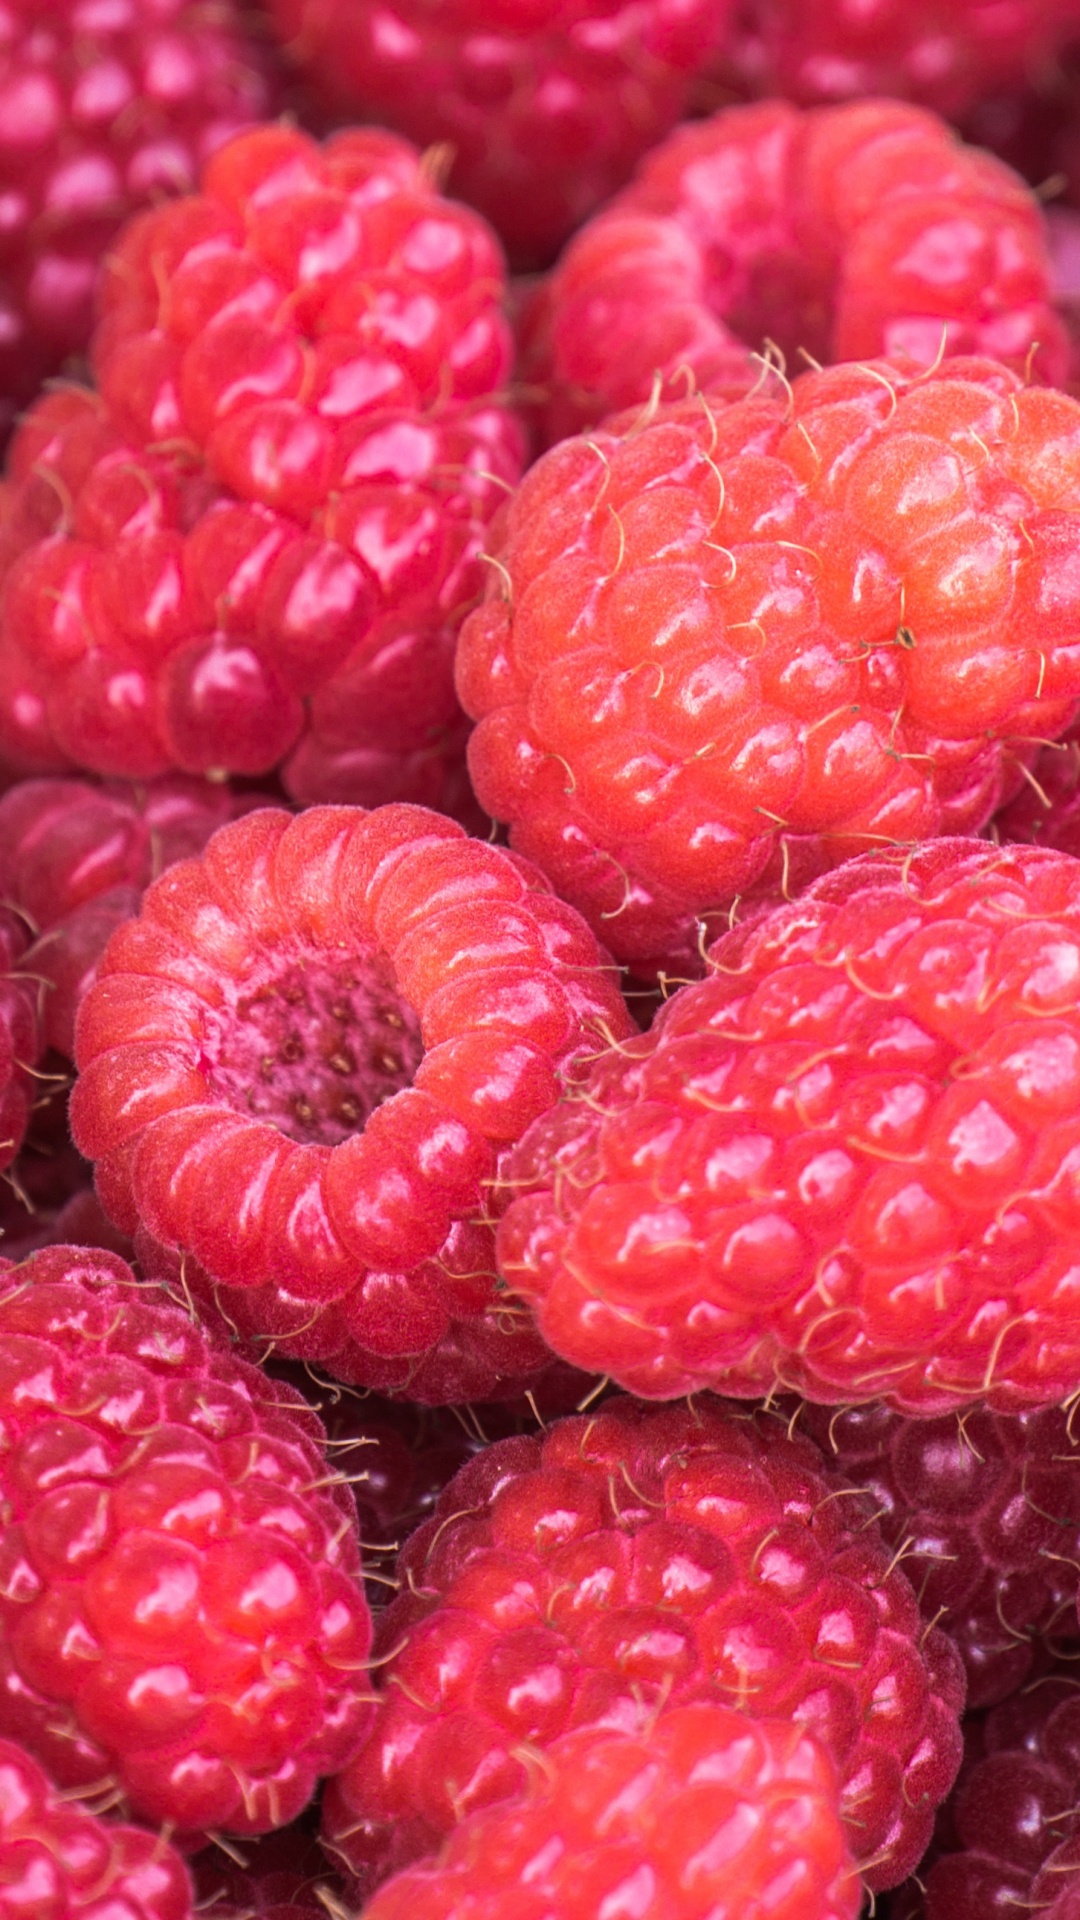 Red Raspberry Fruits in Close up Photography. Wallpaper in 1080x1920 Resolution